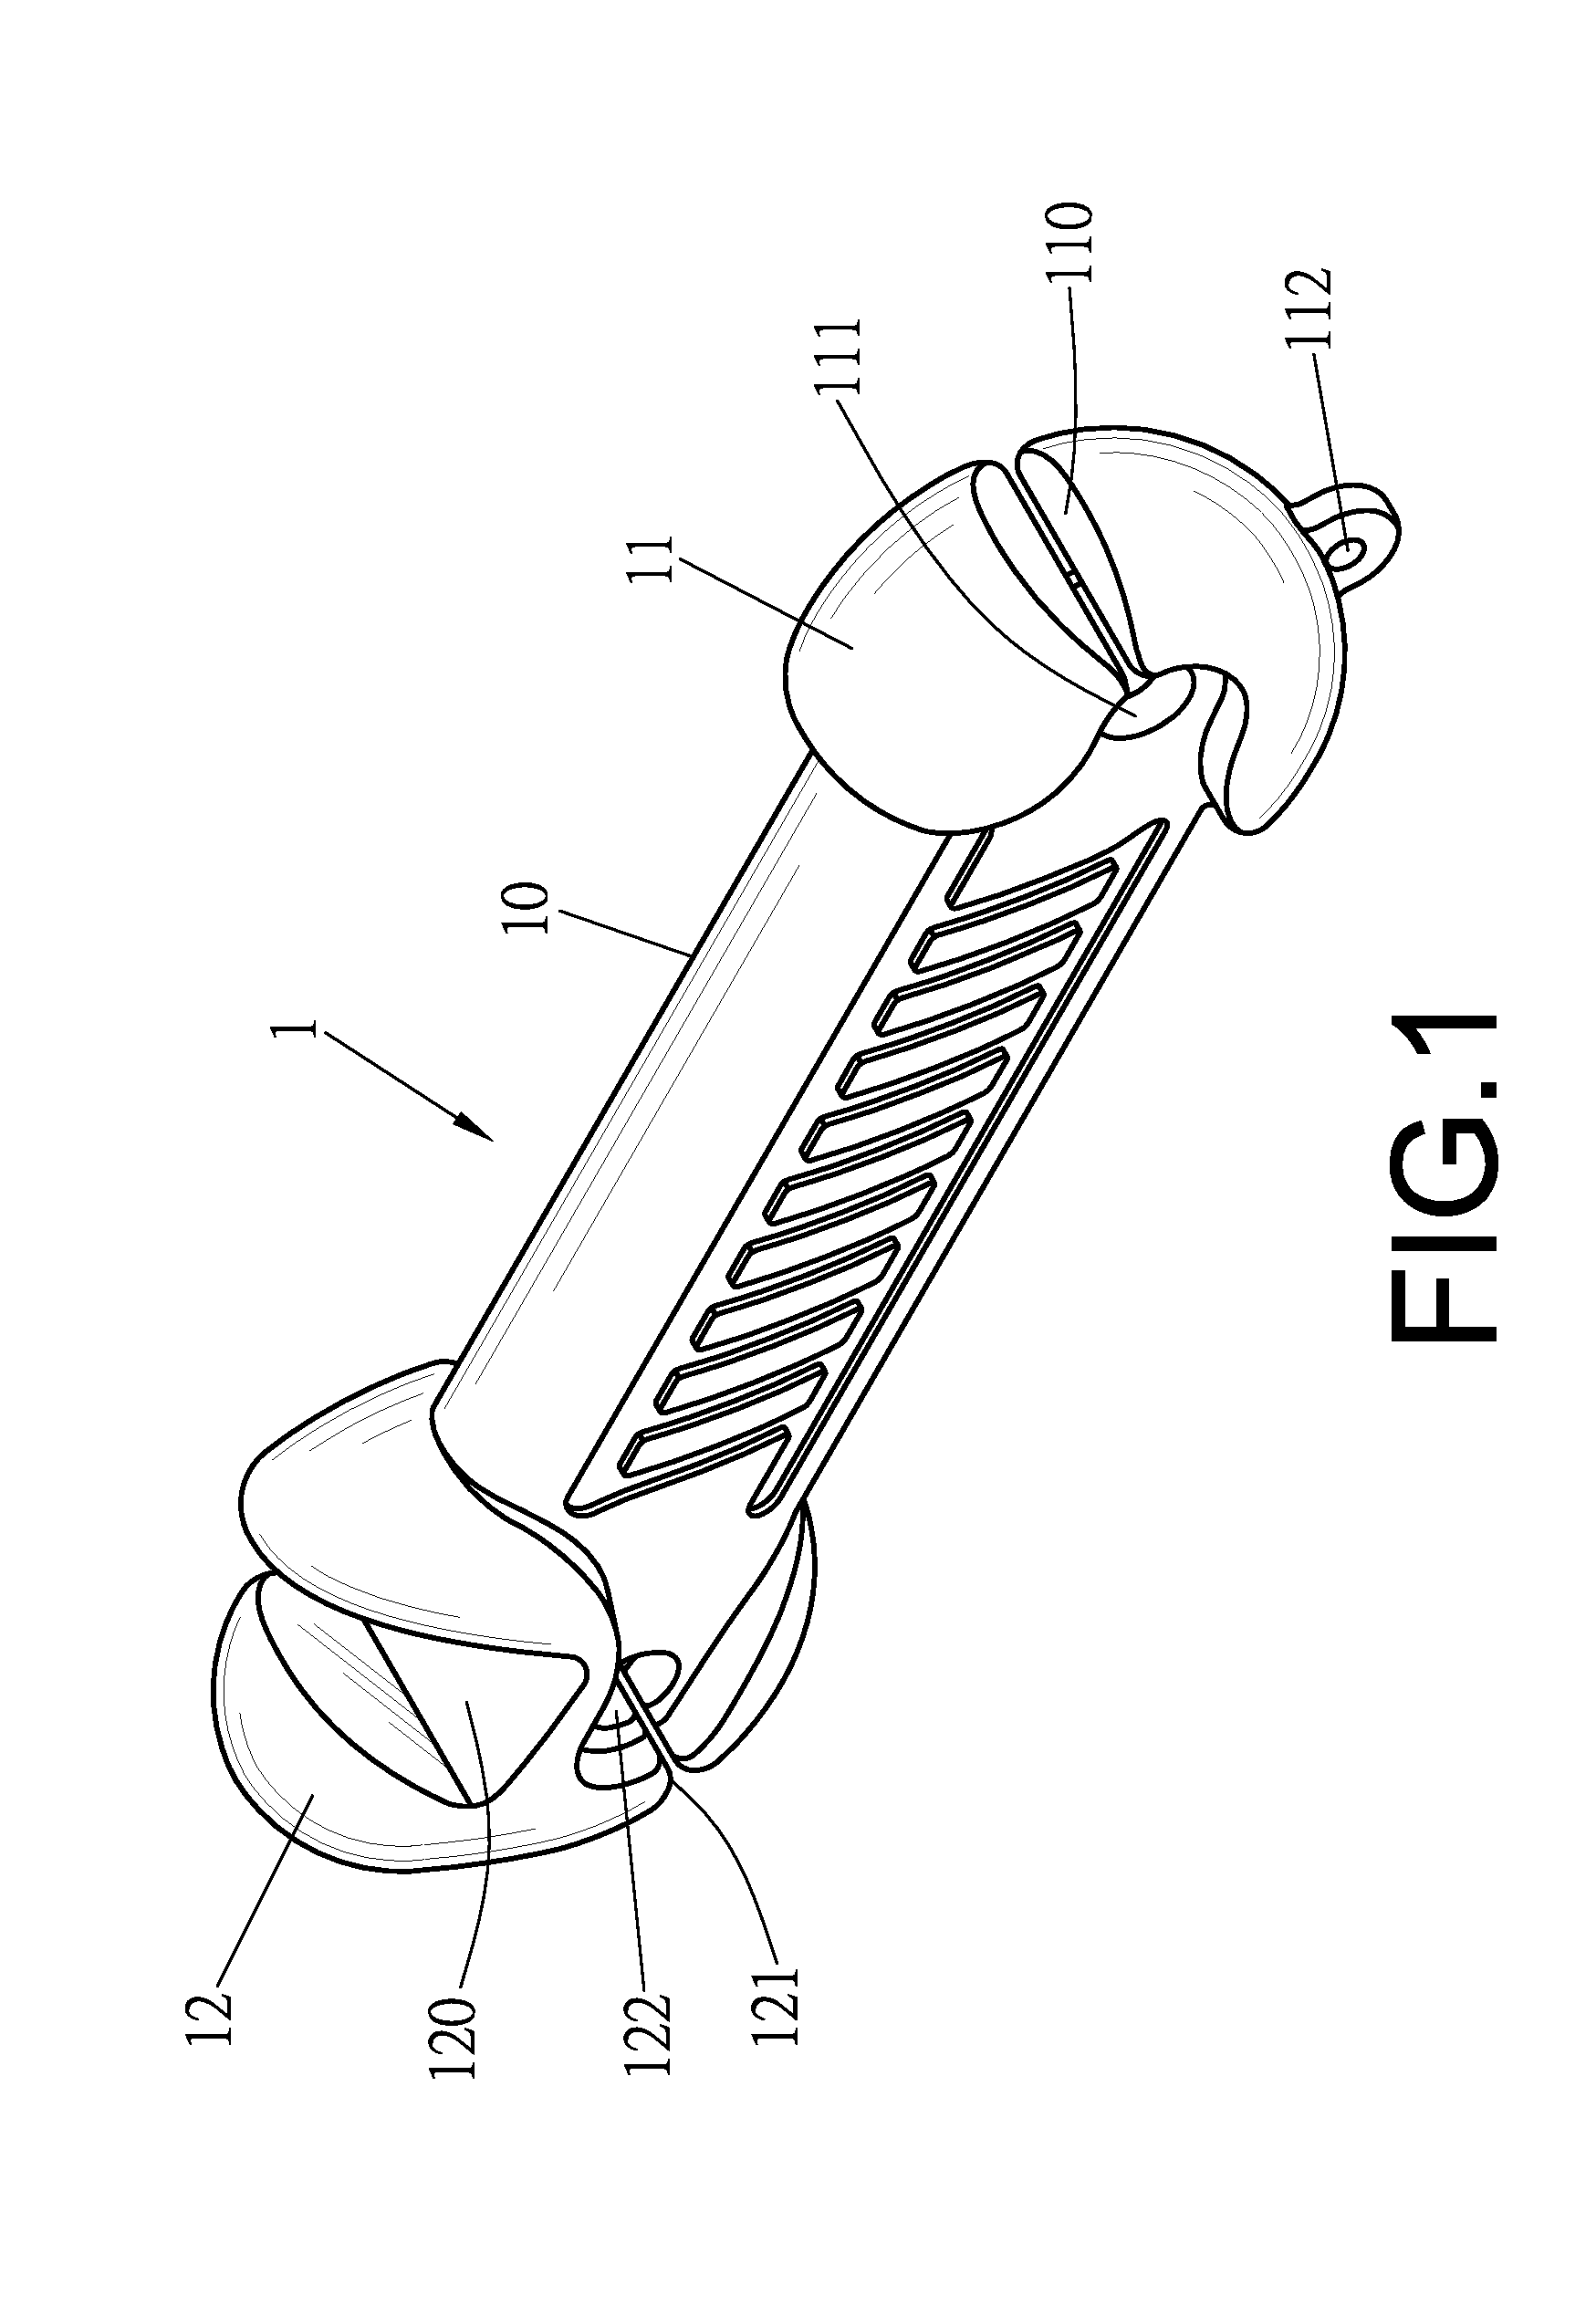 Holder of a portable electric device